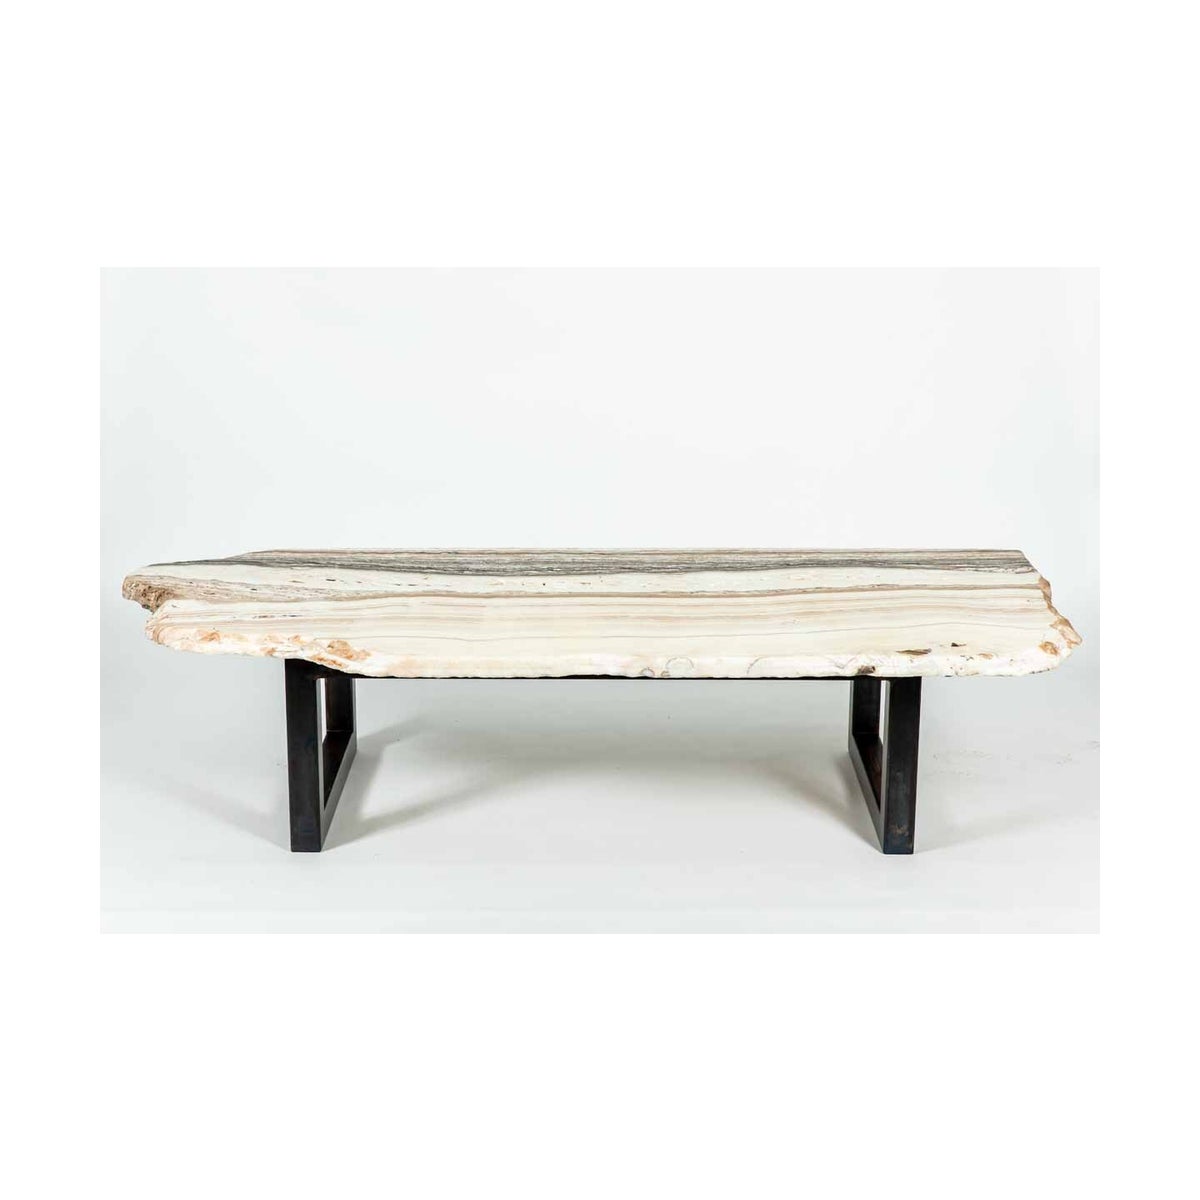 Onyx Cocktail Table  - White with Black Onyx